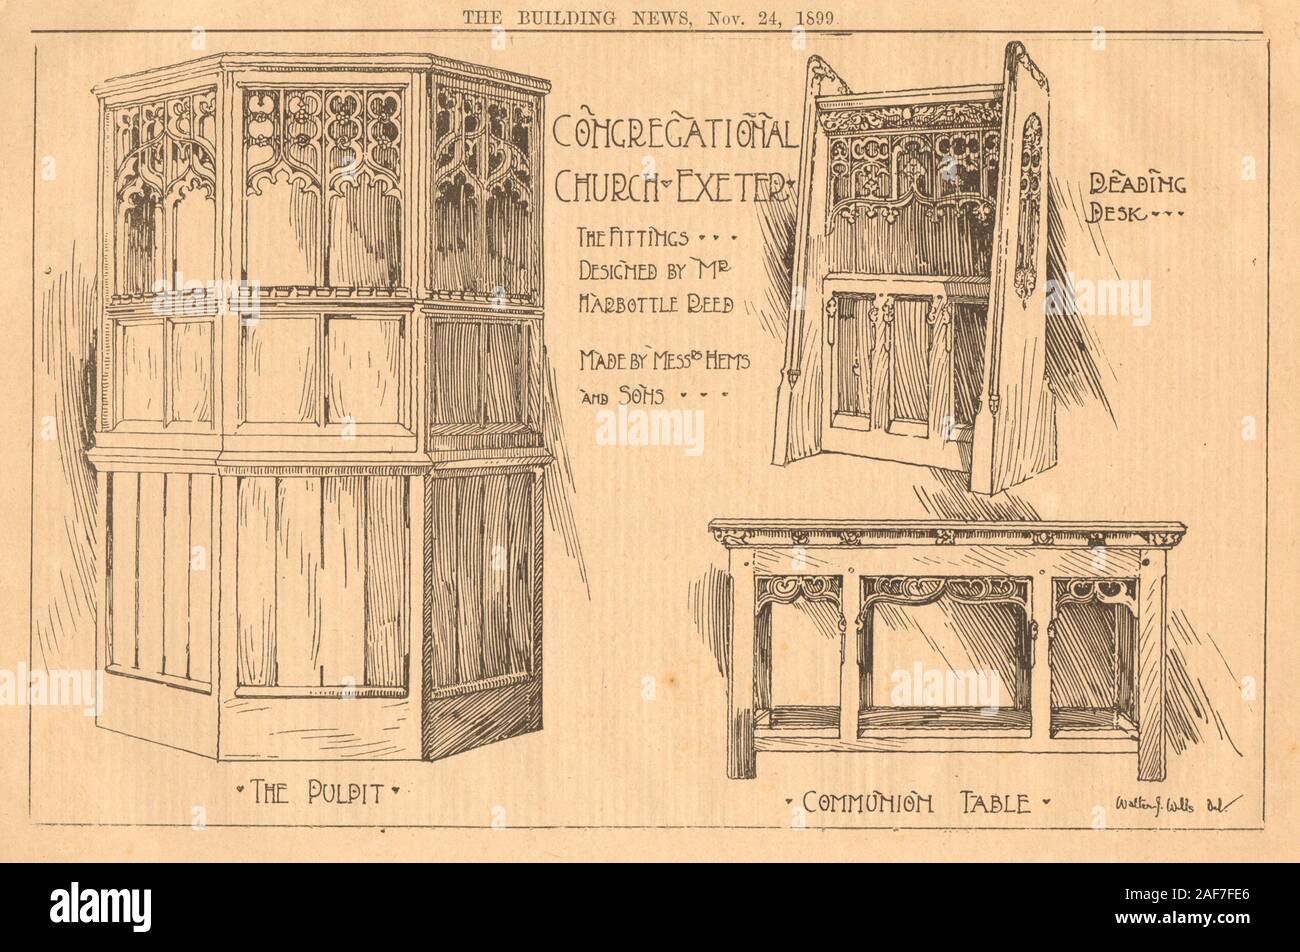 Congregational Church Exeter fittings Harbottle Reed Hems Desk pulpit table 1899 Stock Photo